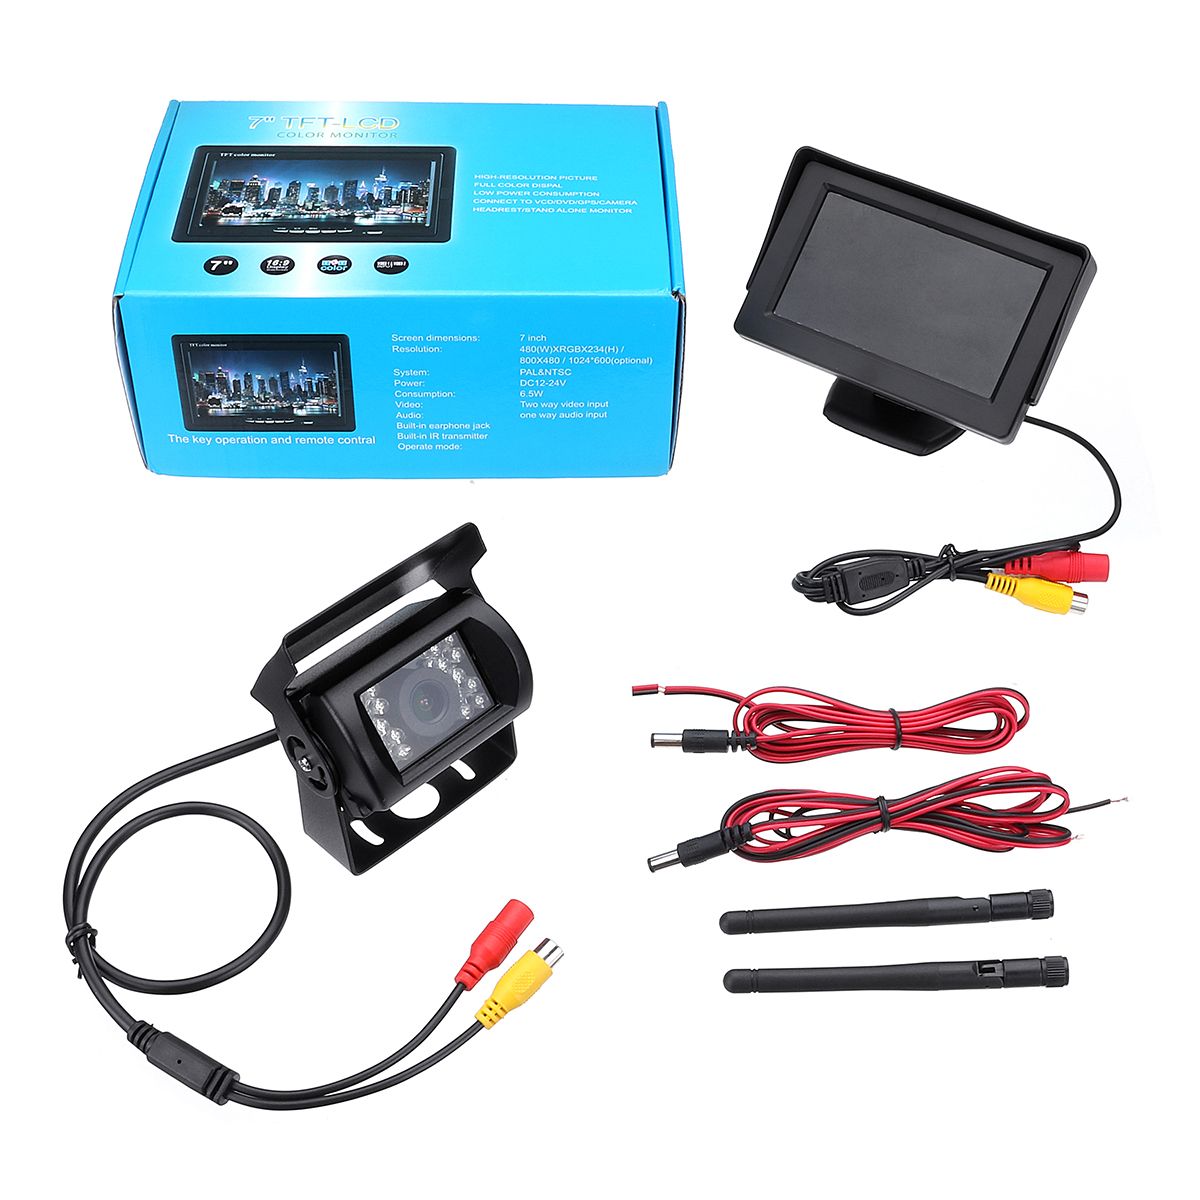 24G-Wireless-Car-Rear-View-Camera43-Inch-Monitor-for-12-24V-Truck-Trailer-1340845